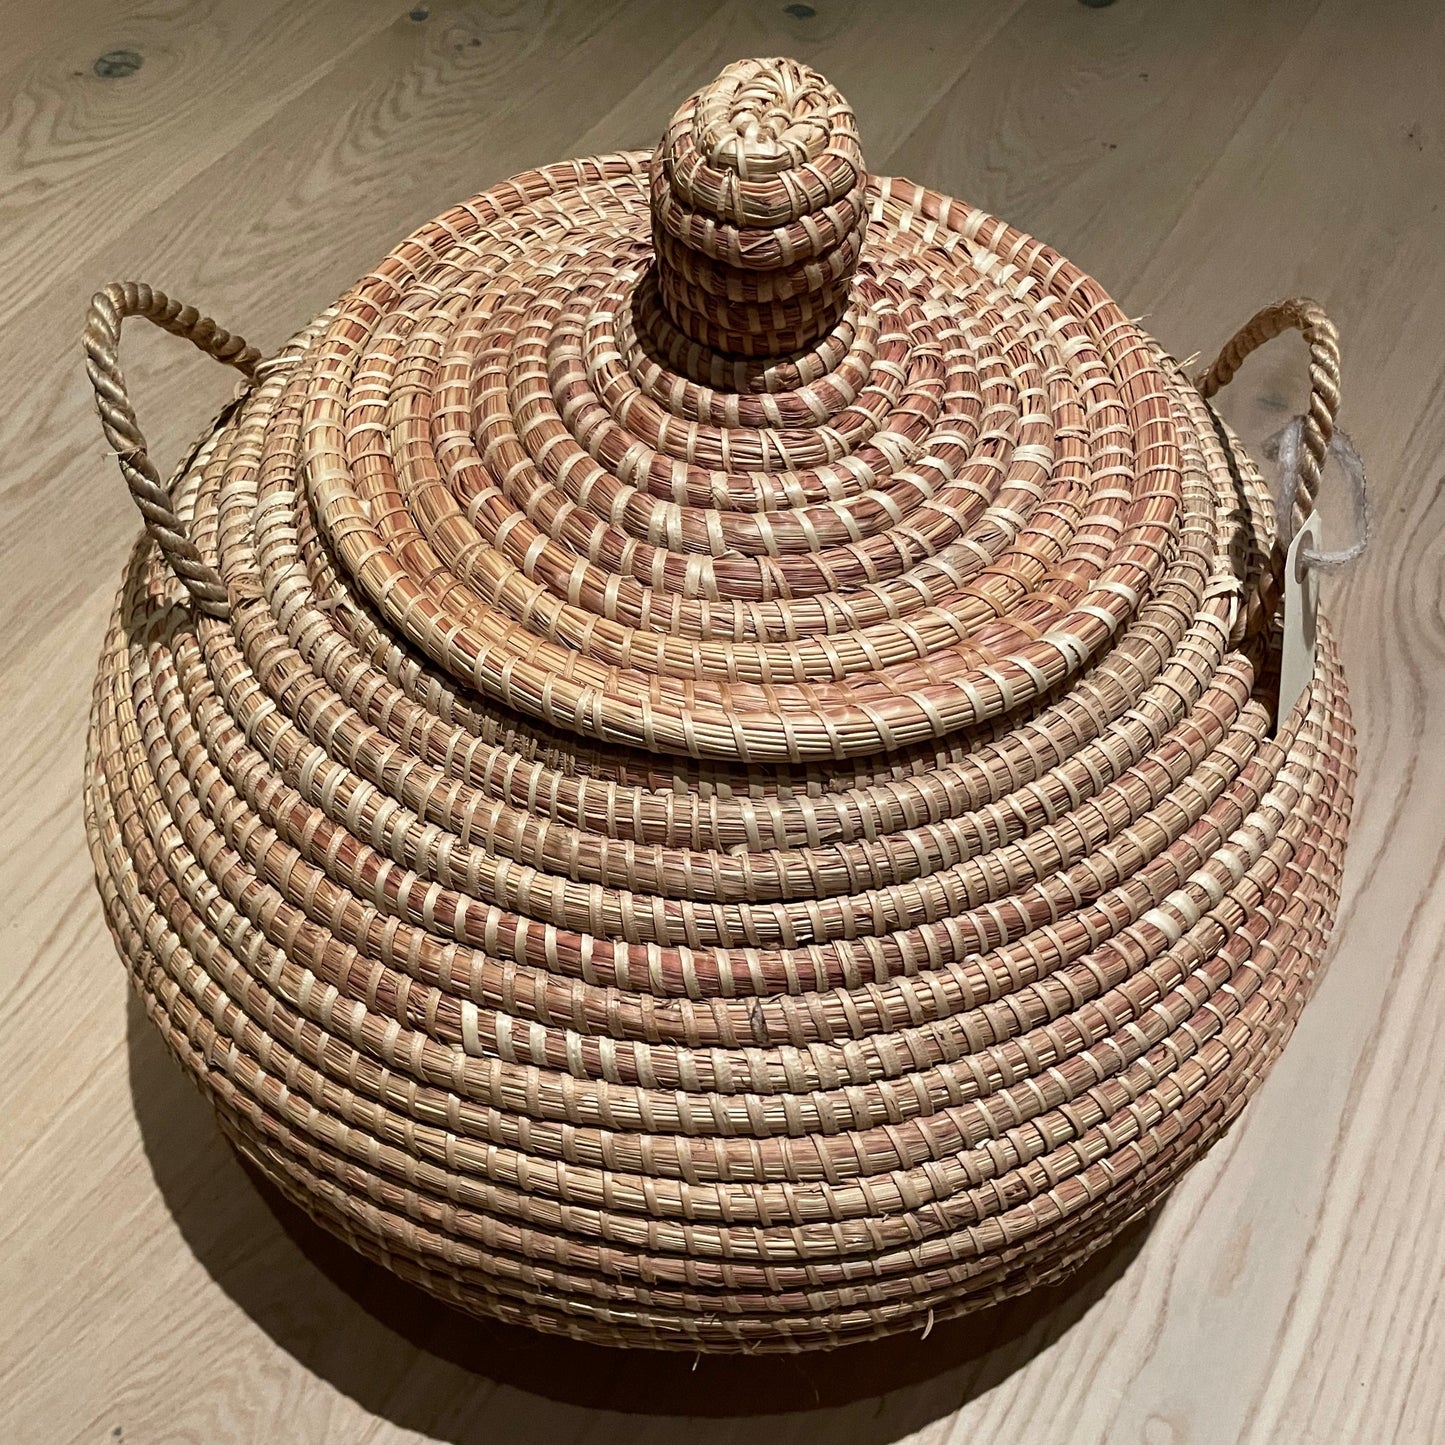 Ball baskets (Ndaa). Handwoven basket with lid in elephant grass with recycled plastic thread. Fair Trade from Senegal